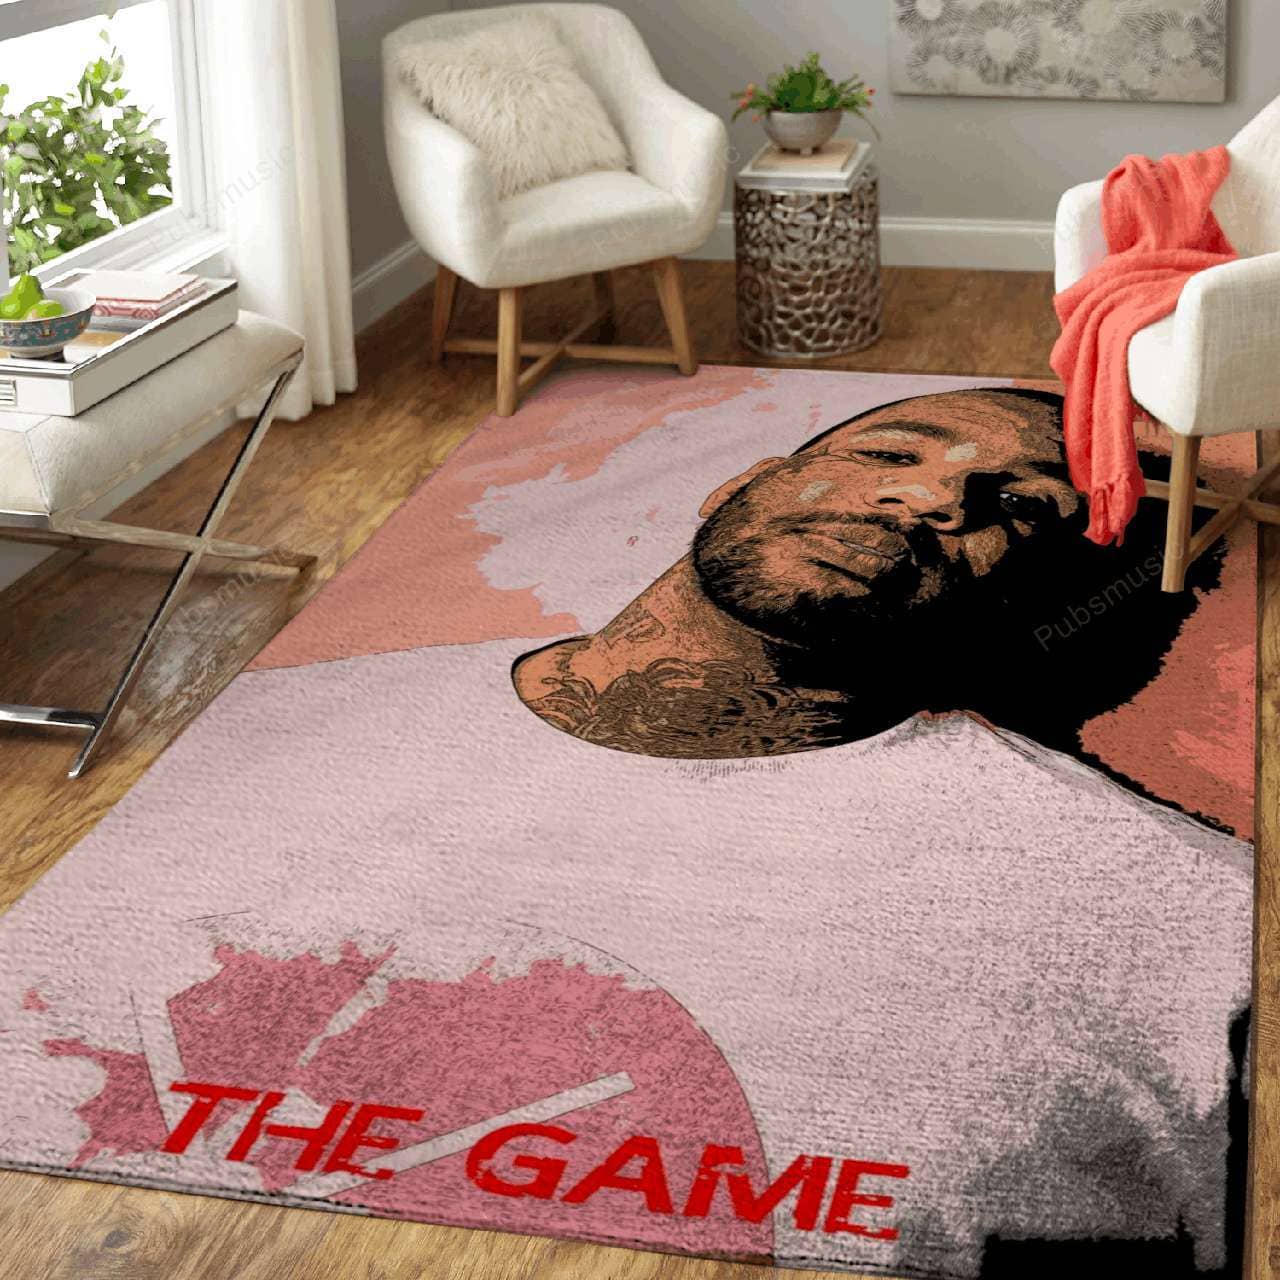 Amazon The Game - Music Art For Fans Living Room Area No6686 Rug